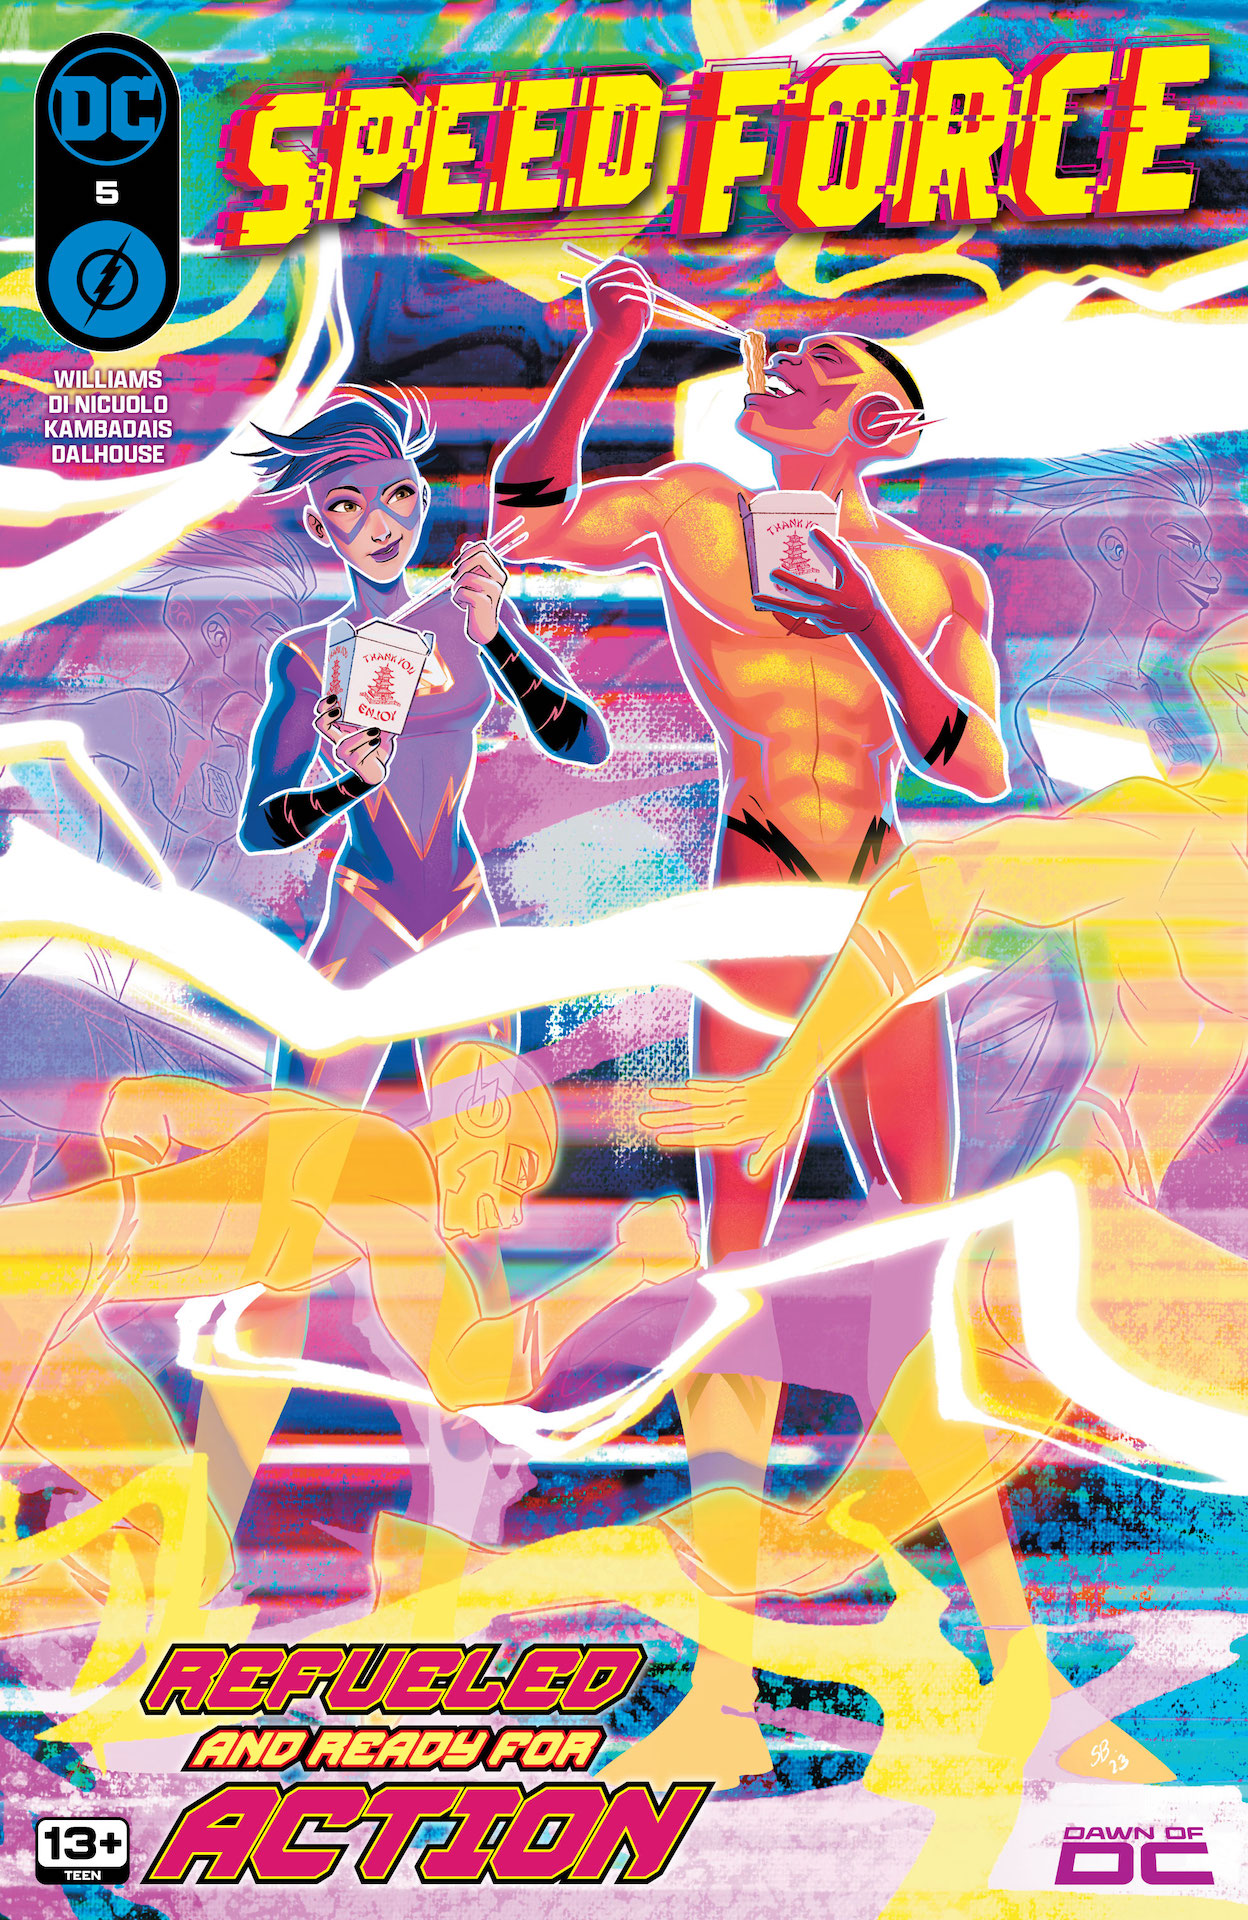 DC Preview: Speed Force #5